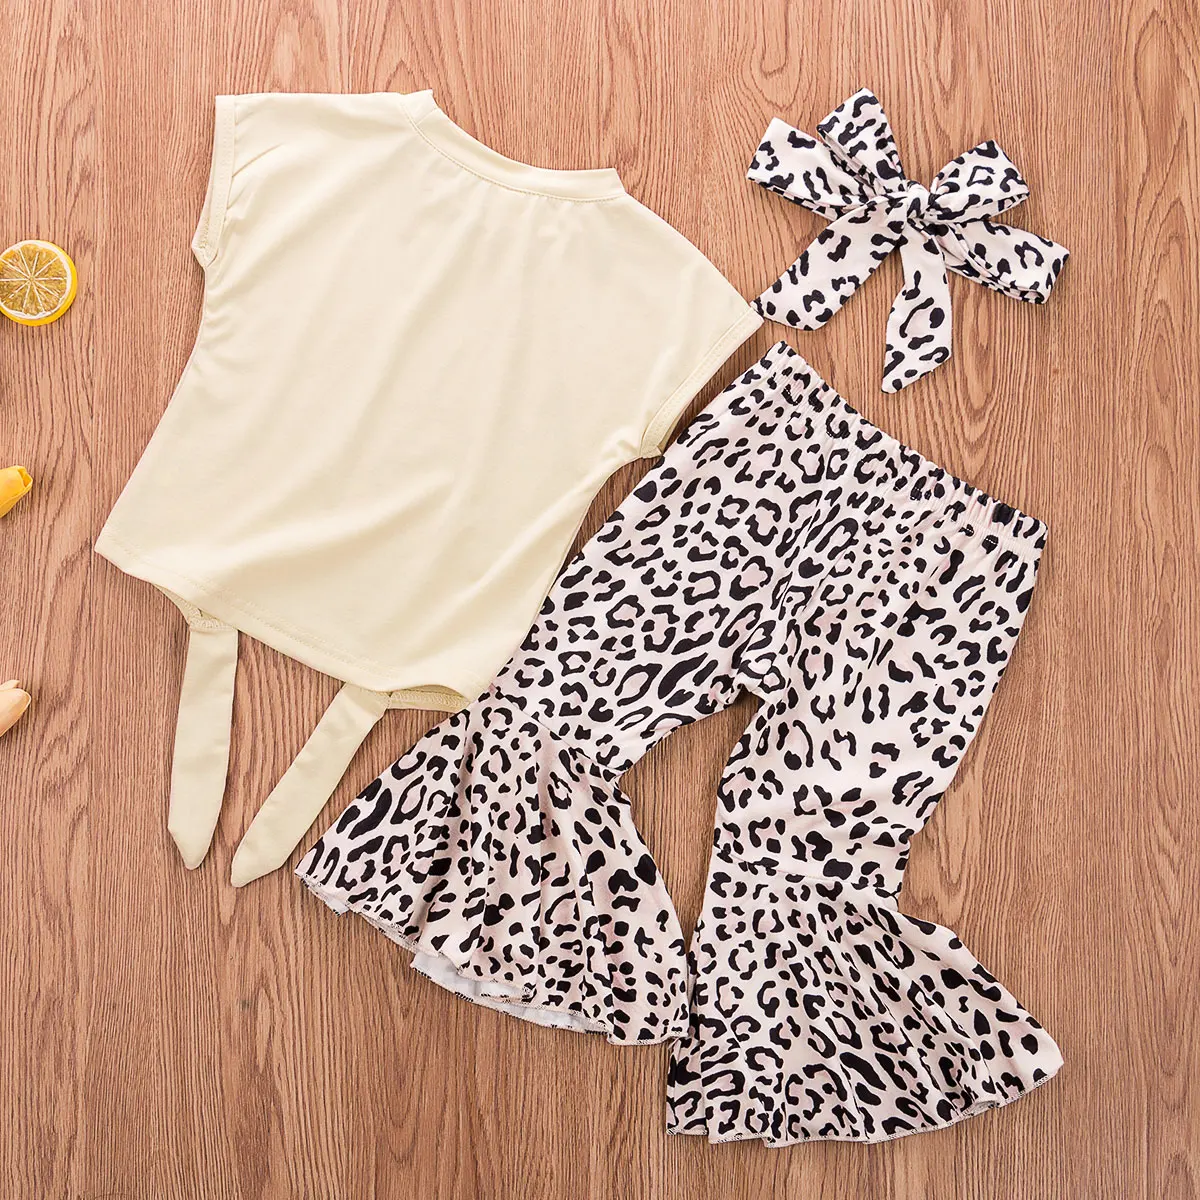 Boutique Girl Clothes 3PCS Toddler Kids Baby Girl Short Sleeve Clothes Tops+Leopard Trousers+Headband Outfits Set